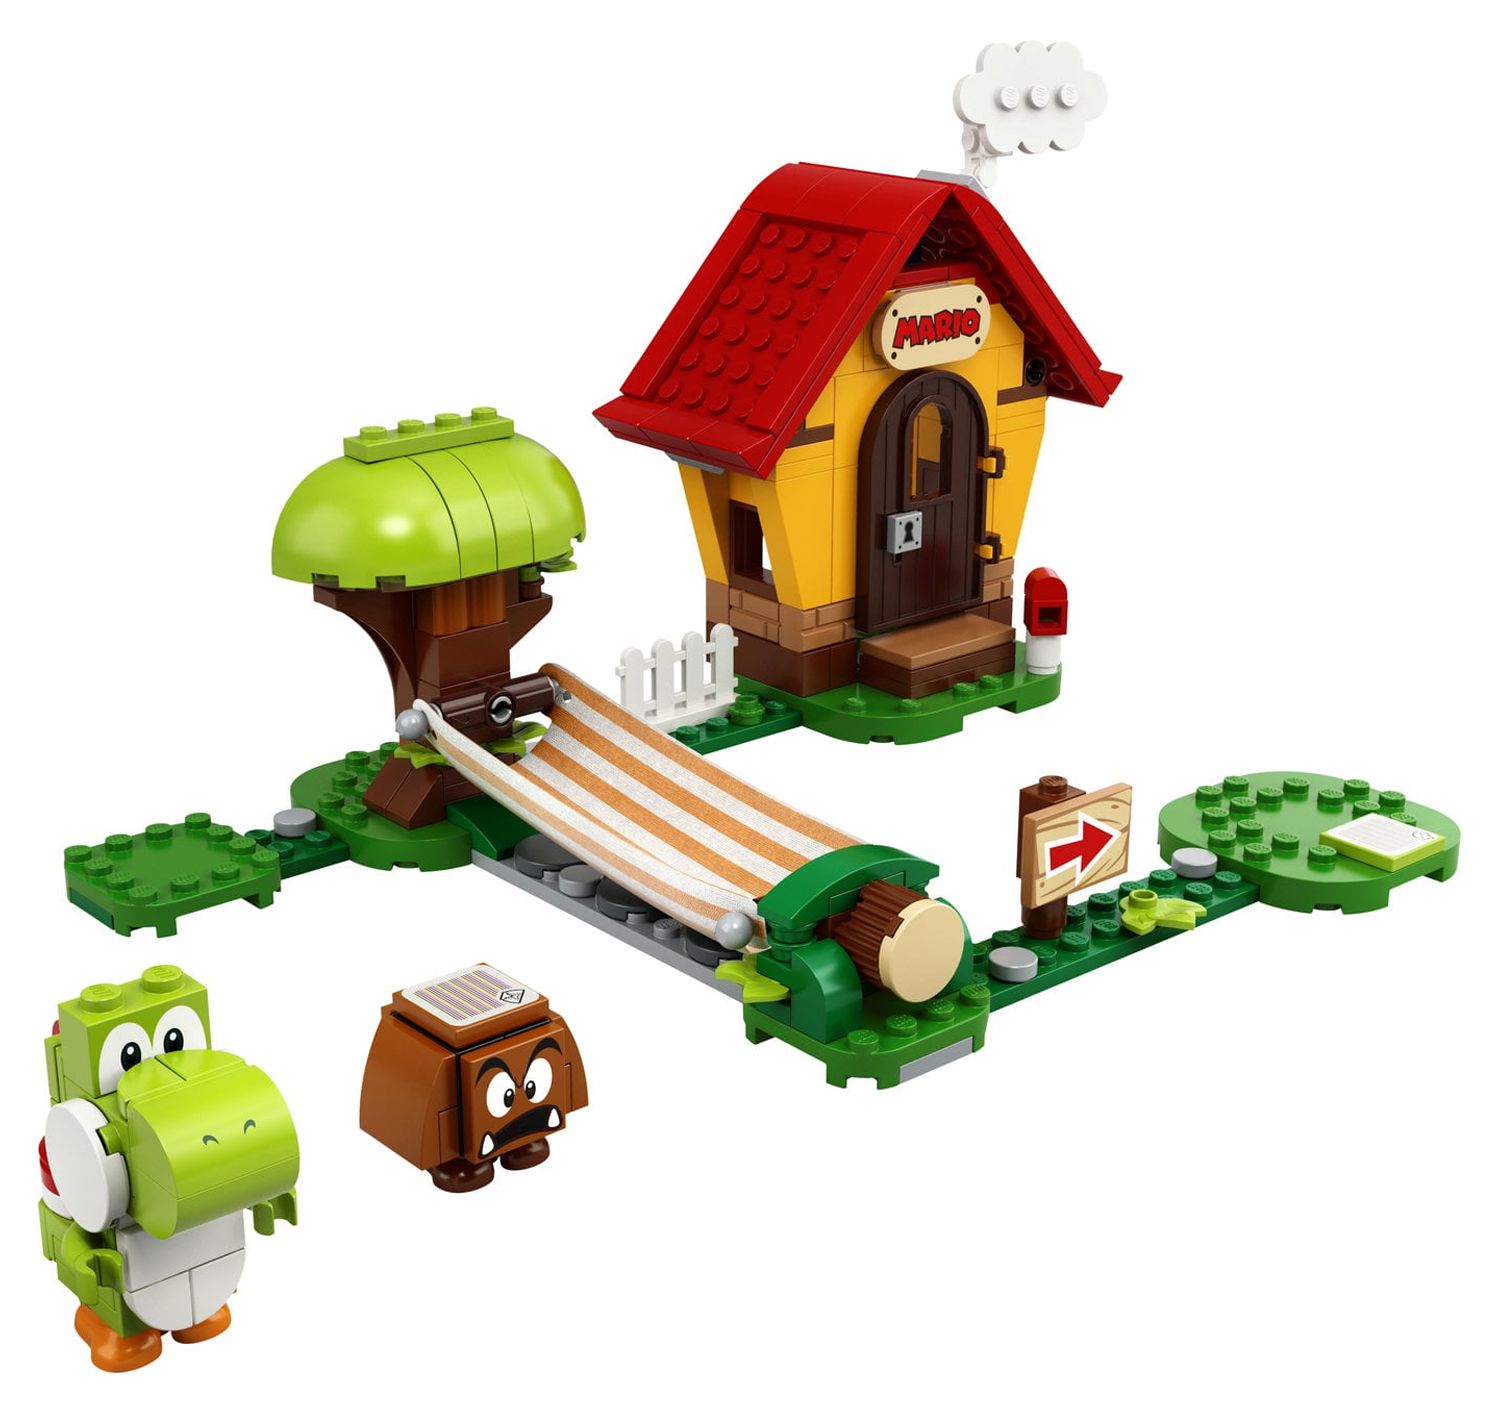 LEGO Super Mario Mario’s House & Yoshi Expansion Set 71367 Building Toy for Kids (205 Pieces) - image 5 of 5